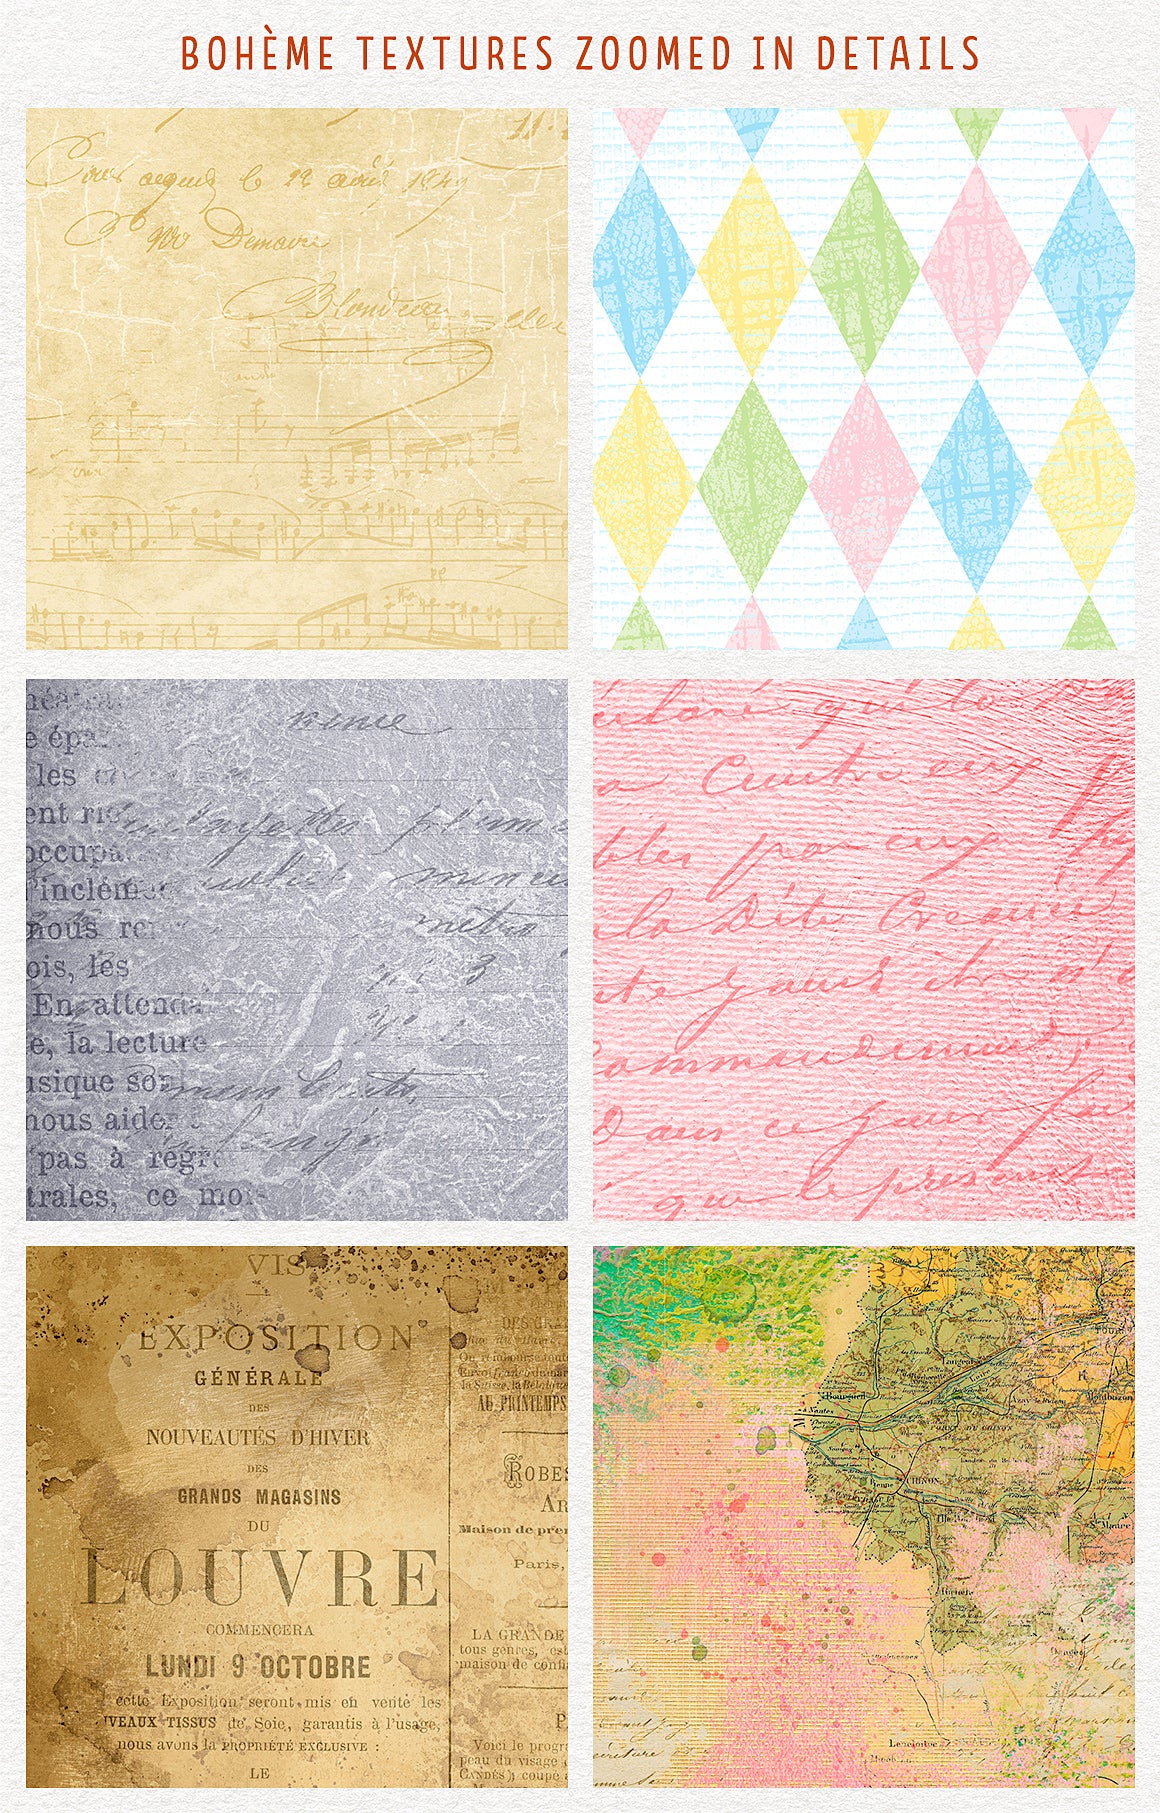 Details from the Boheme chic fusions texture collection with vintage elements. Extra-large, Extended license.